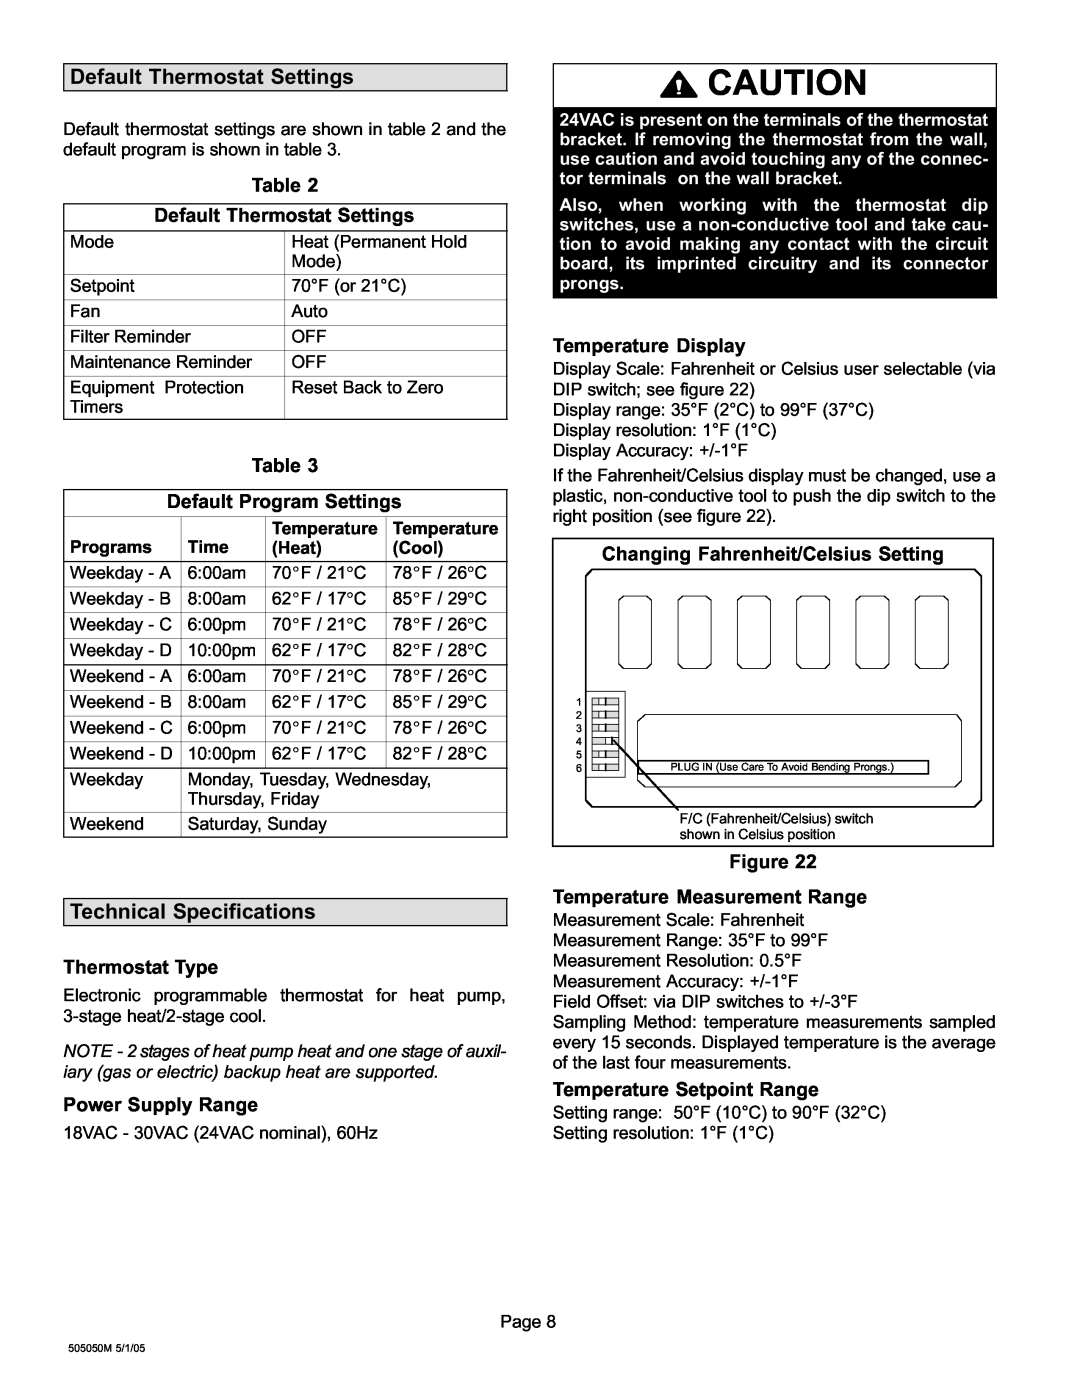 Lennox International Inc 51M37 Technical Specifications, Table Default Thermostat Settings, Thermostat Type 